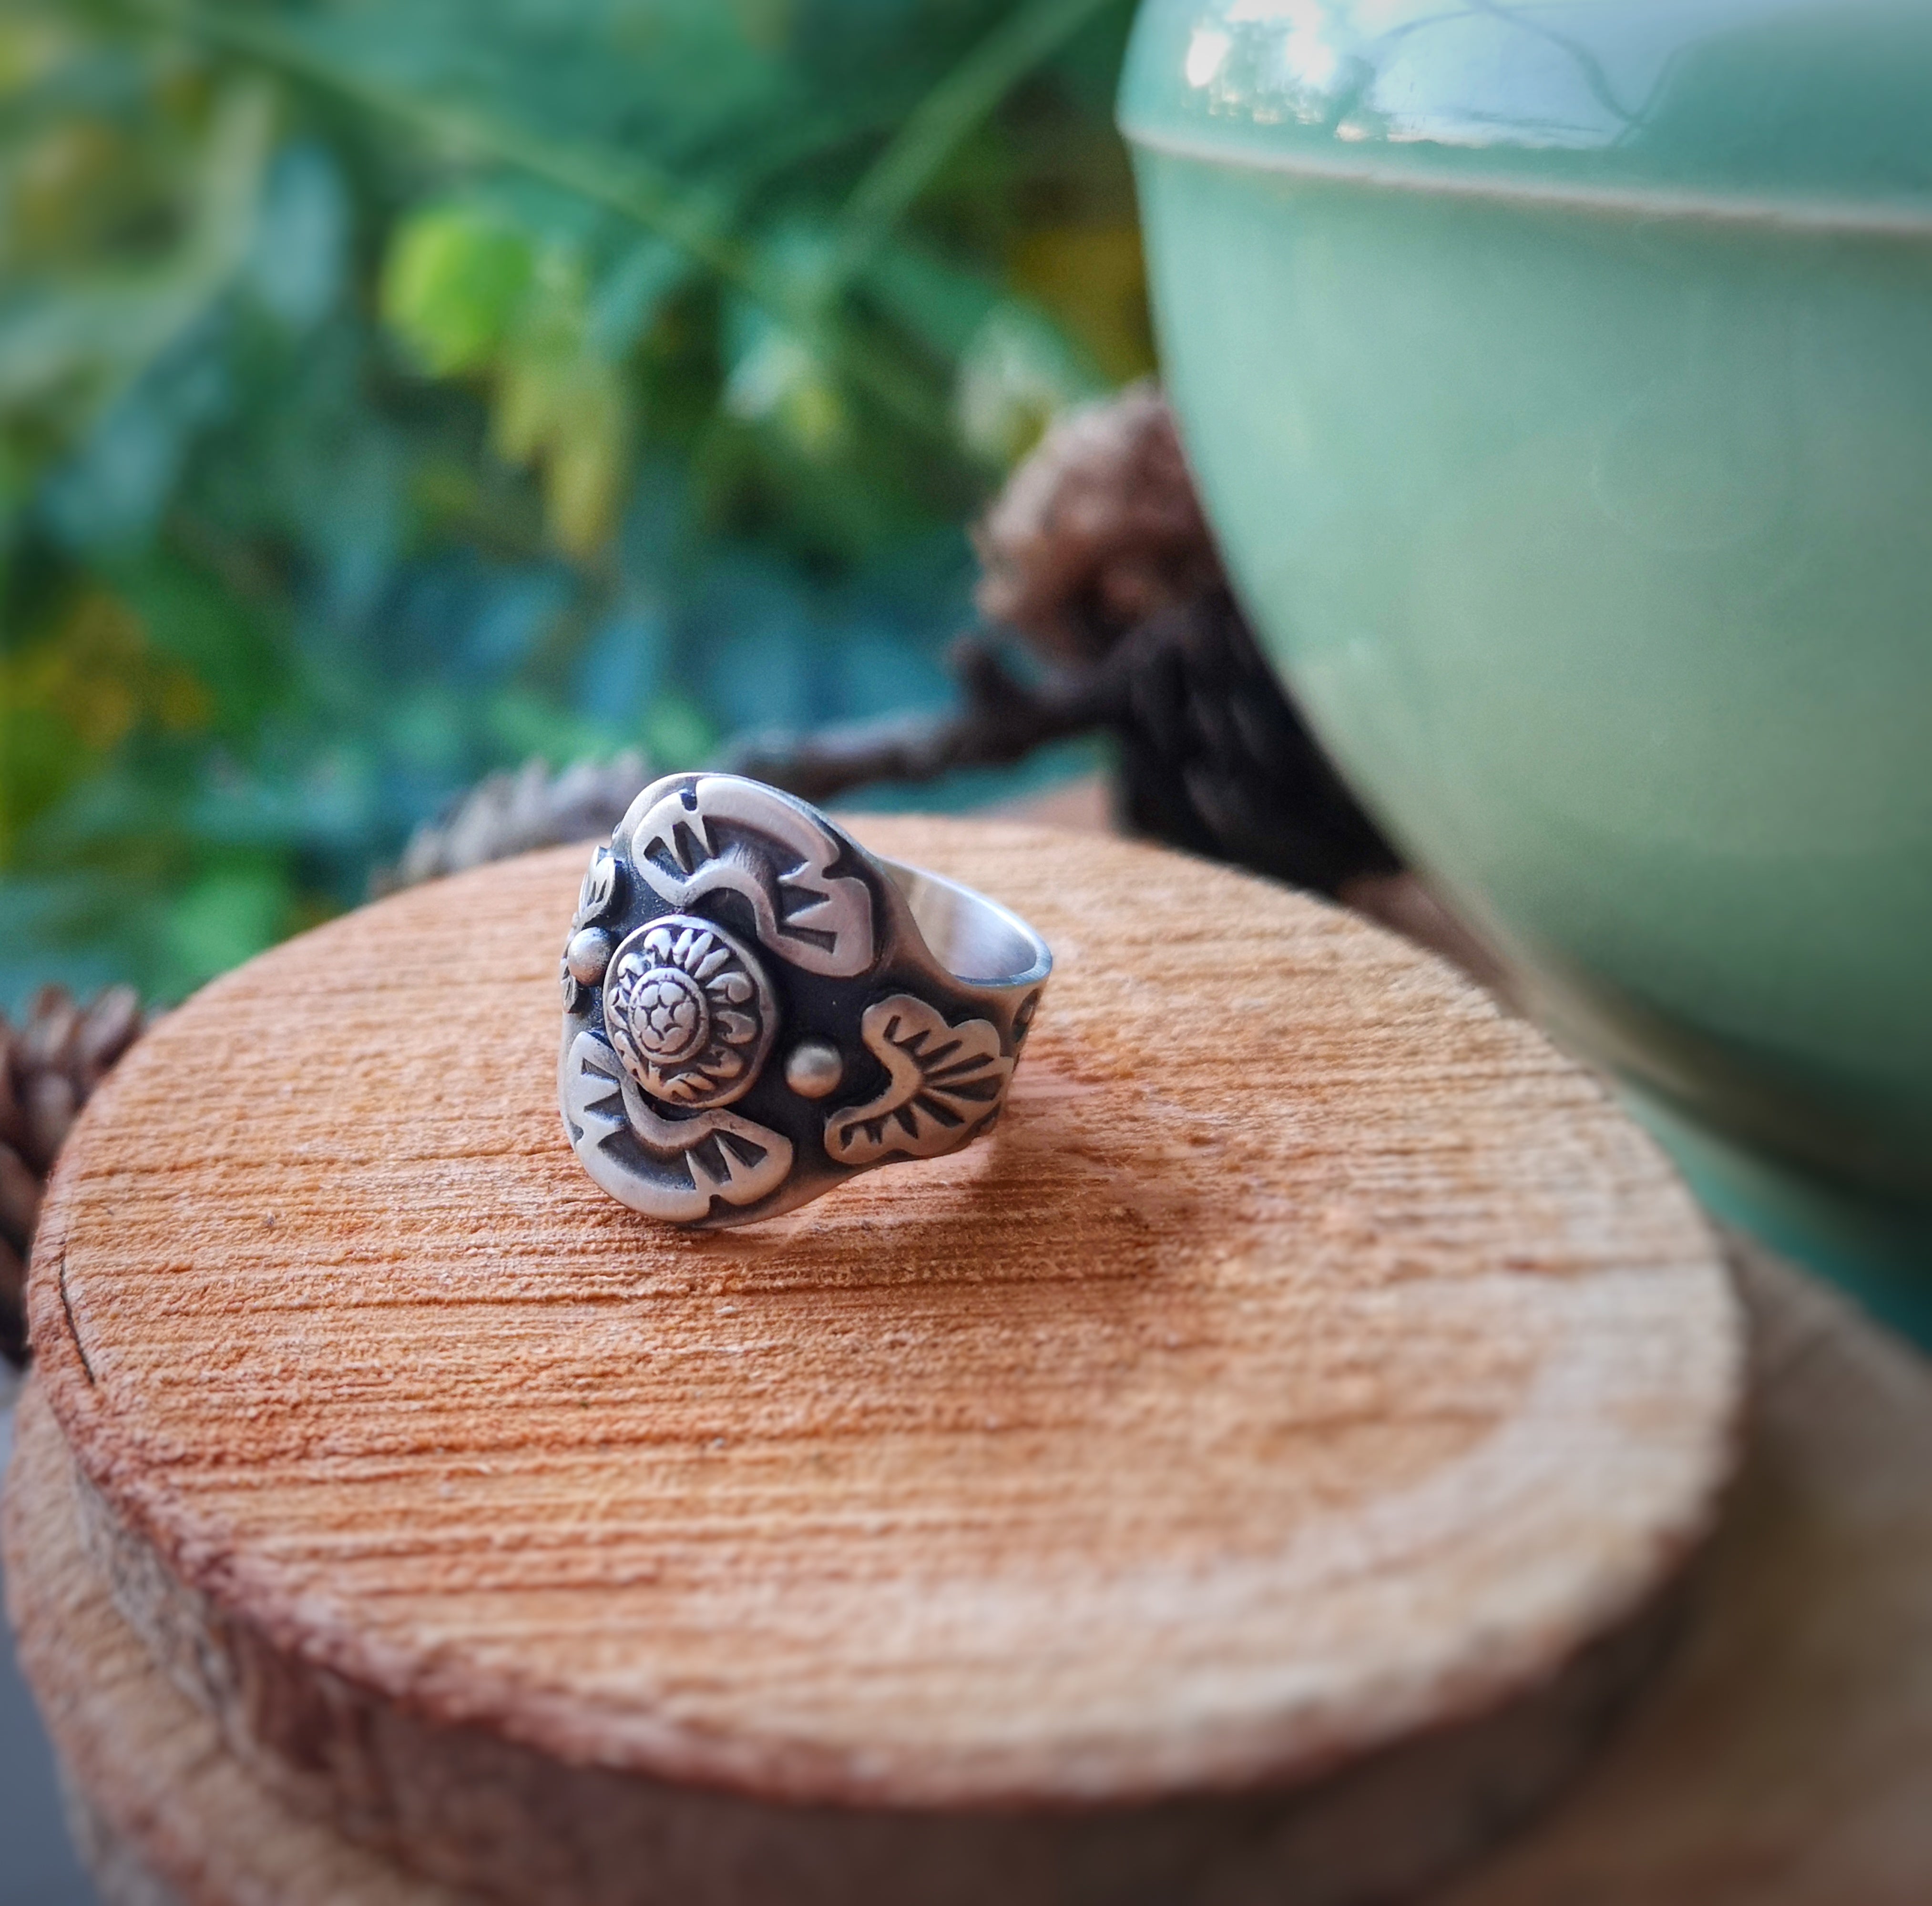 The Peaceful Warrior Ring